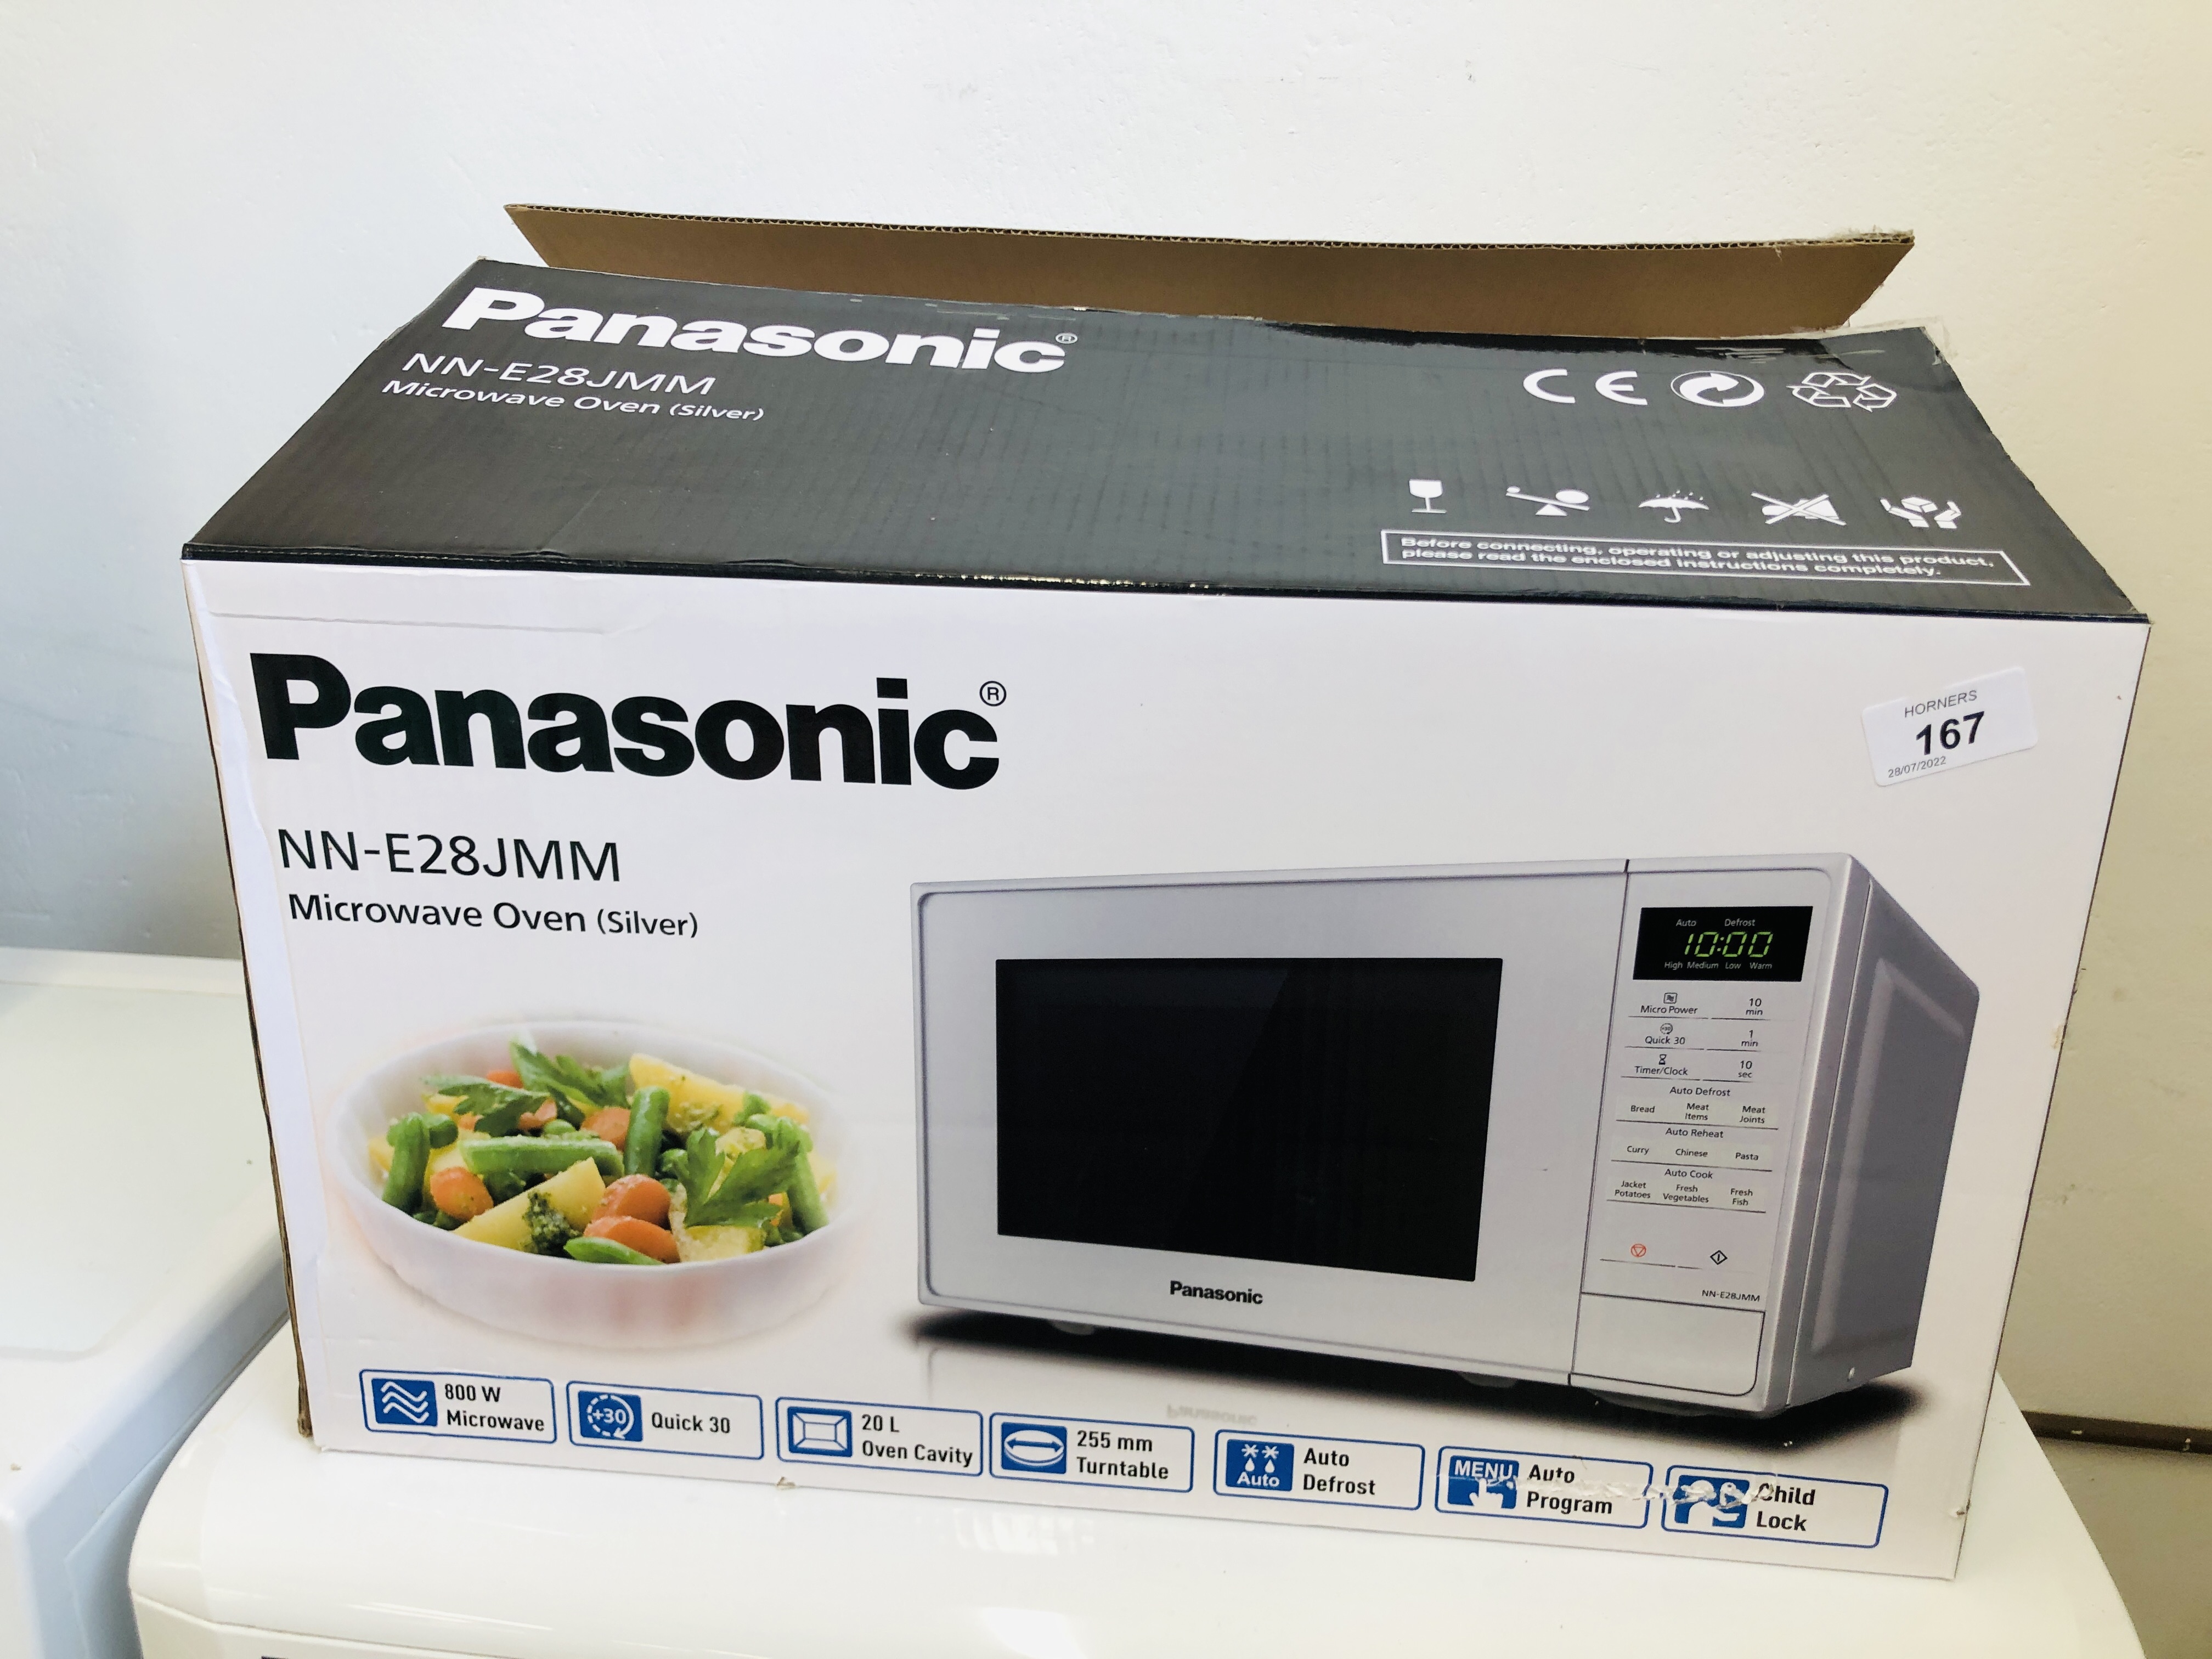 A PANASONIC MICROWAVE OVEN MODEL NN-EZ8JMM - SOLD AS SEEN. - Image 3 of 3